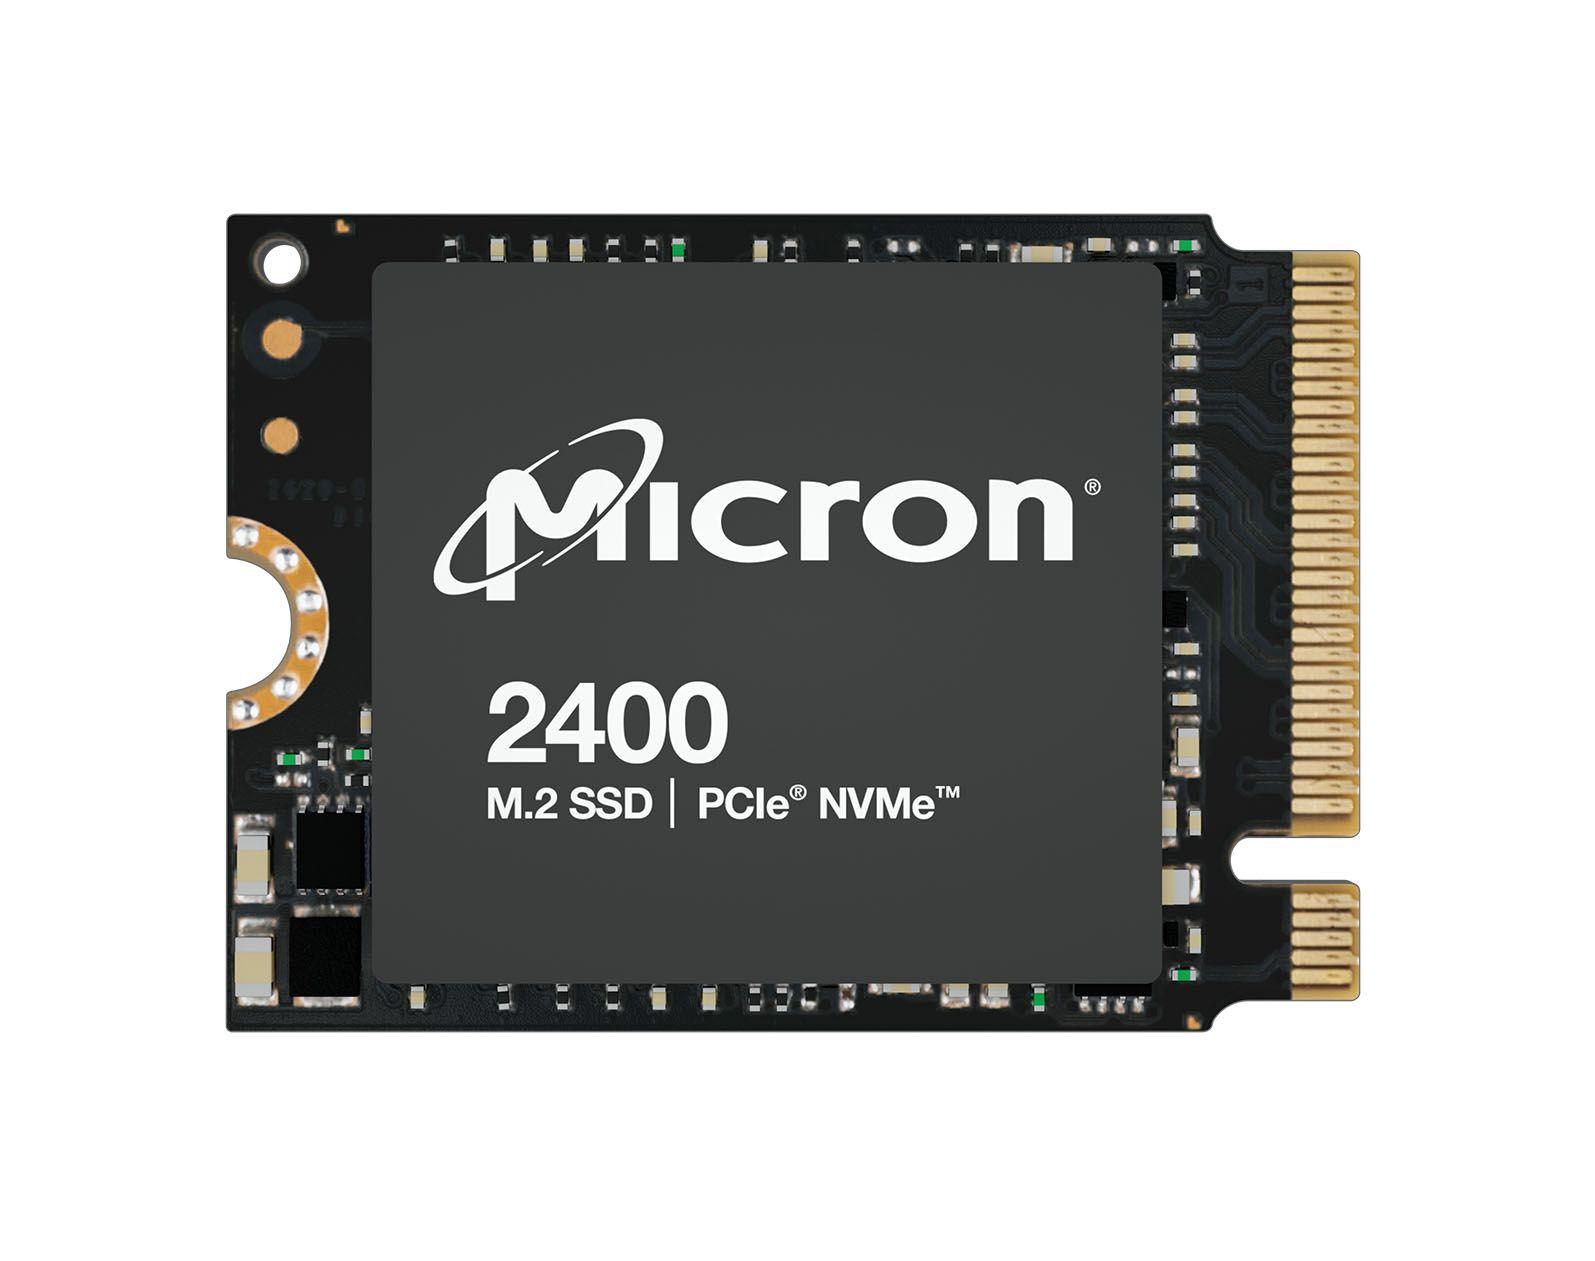 2TB Micron 2400 M2 2230 NVMe PCIe SSD Solid State Drive for $121.59 Shipped